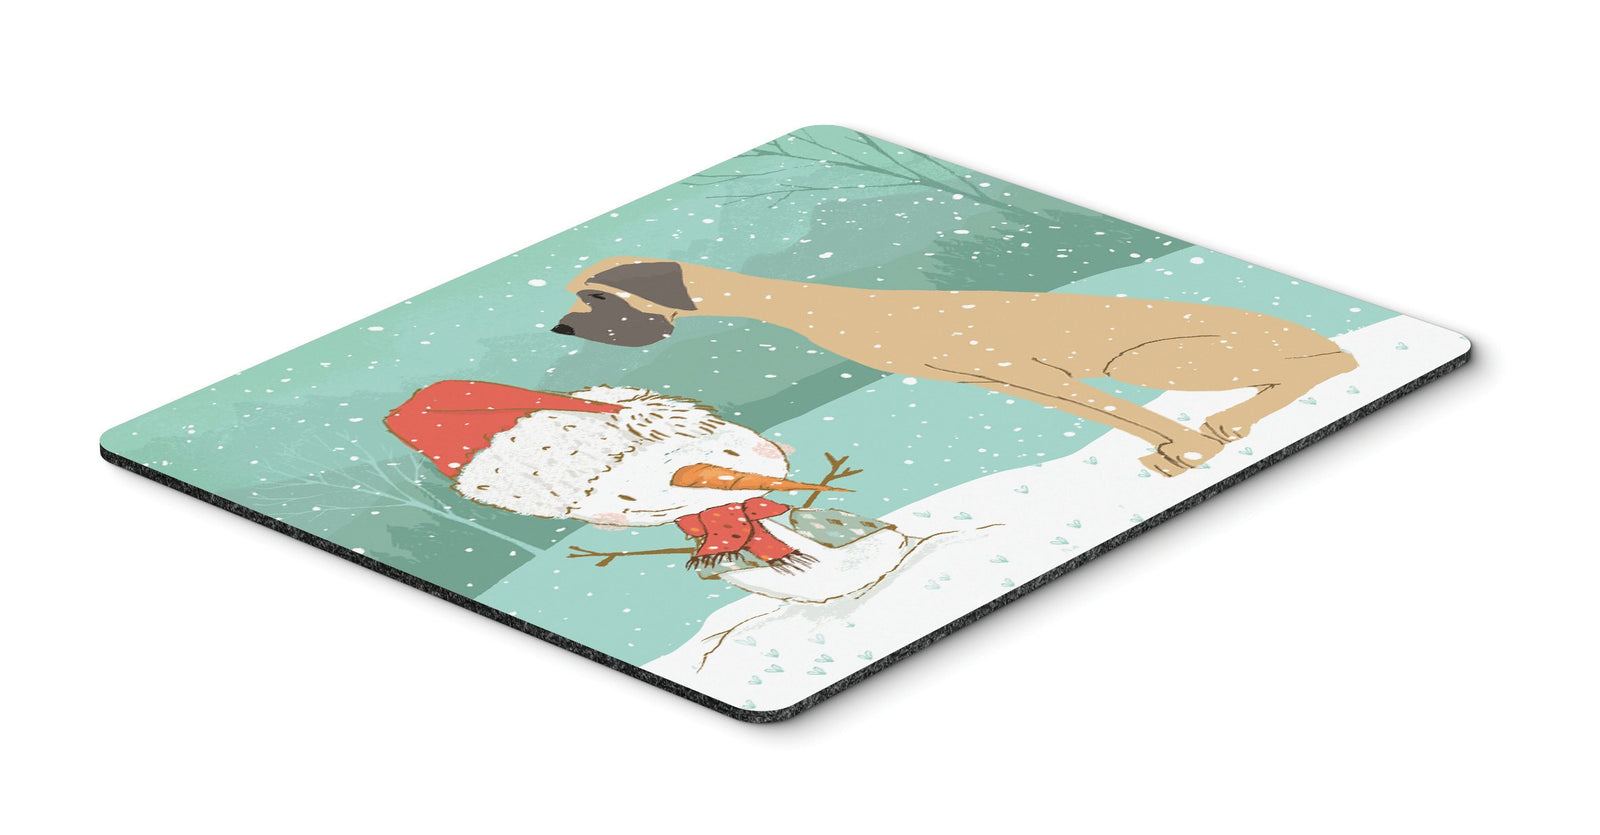 Fawn Natural Great Dane Snowman Christmas Mouse Pad, Hot Pad or Trivet CK2040MP by Caroline's Treasures